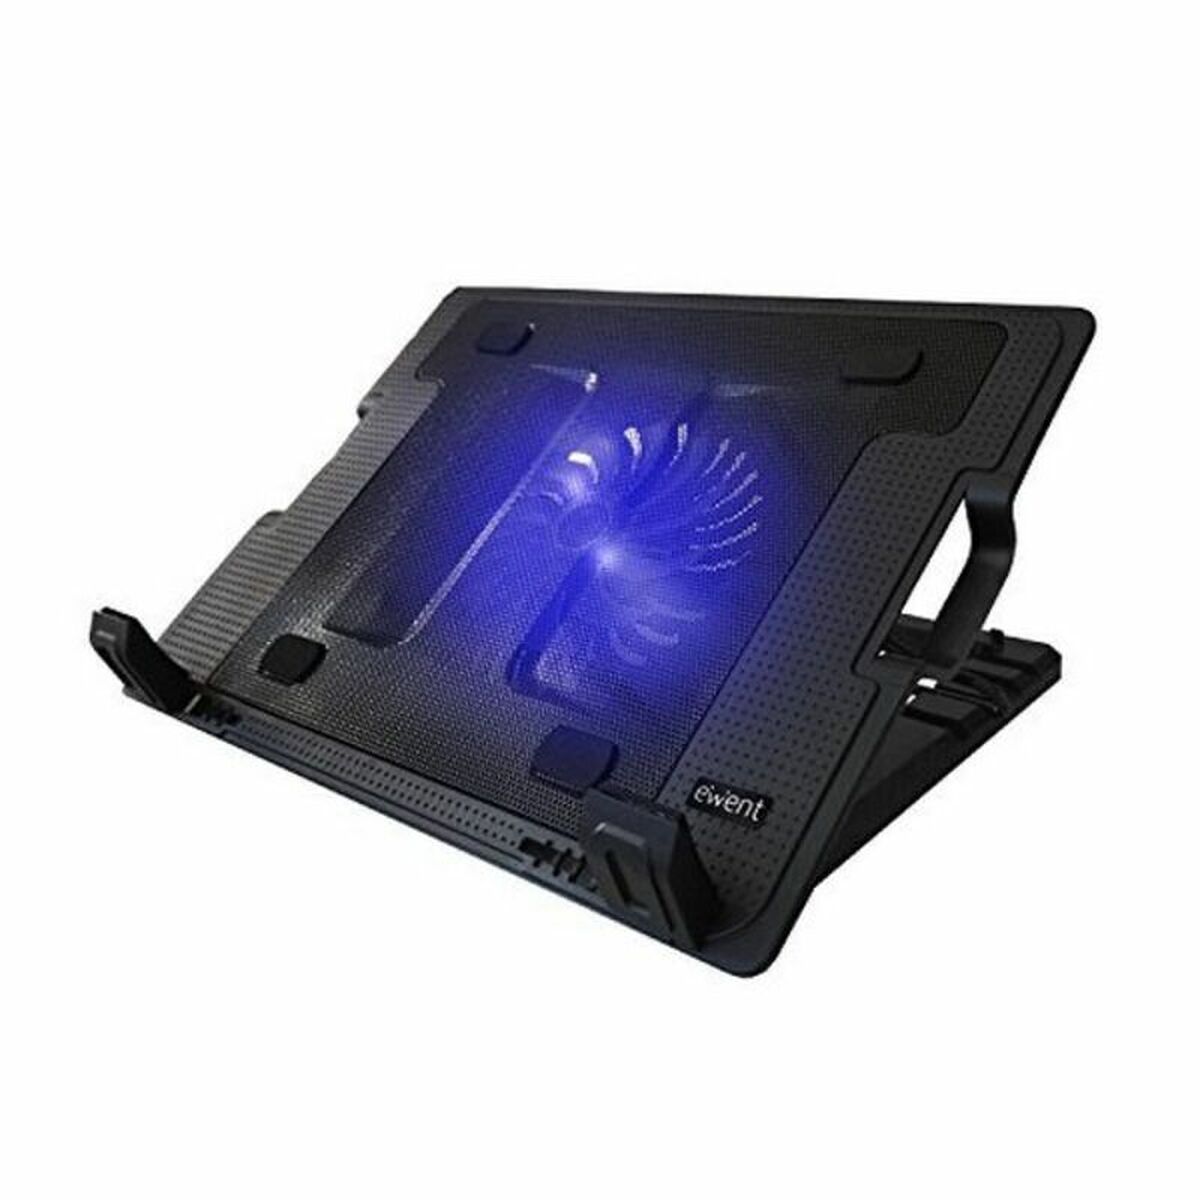 Cooling Base for a Laptop Ewent EW1258 17" Black